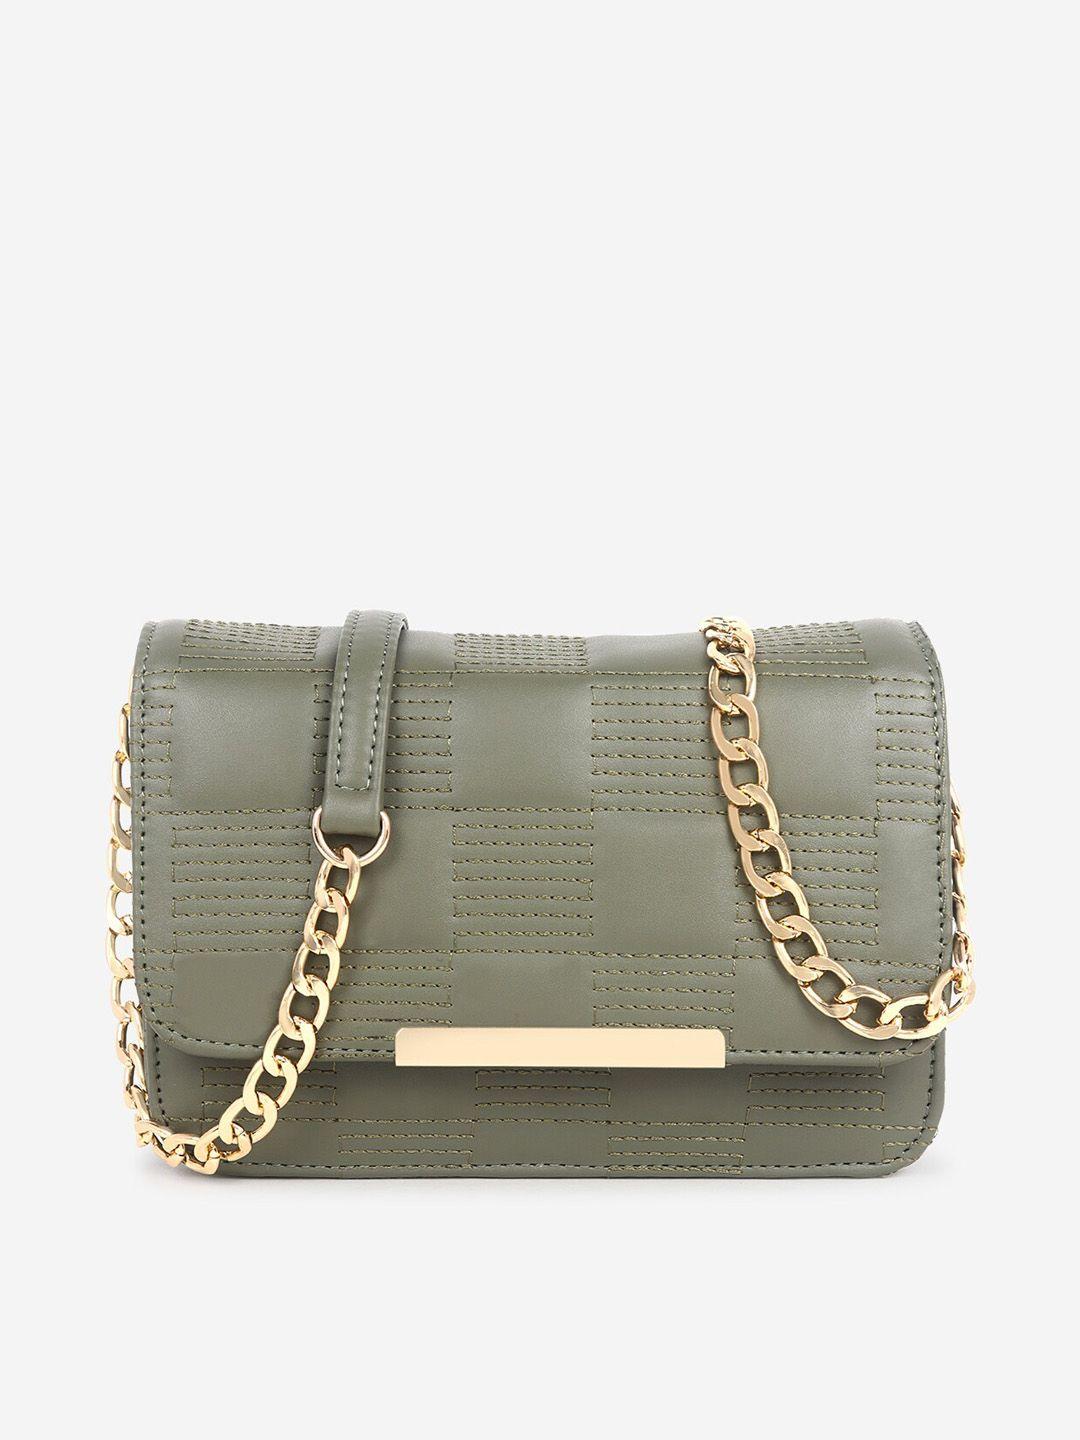 black spade olive green textured structured sling bag with quilted